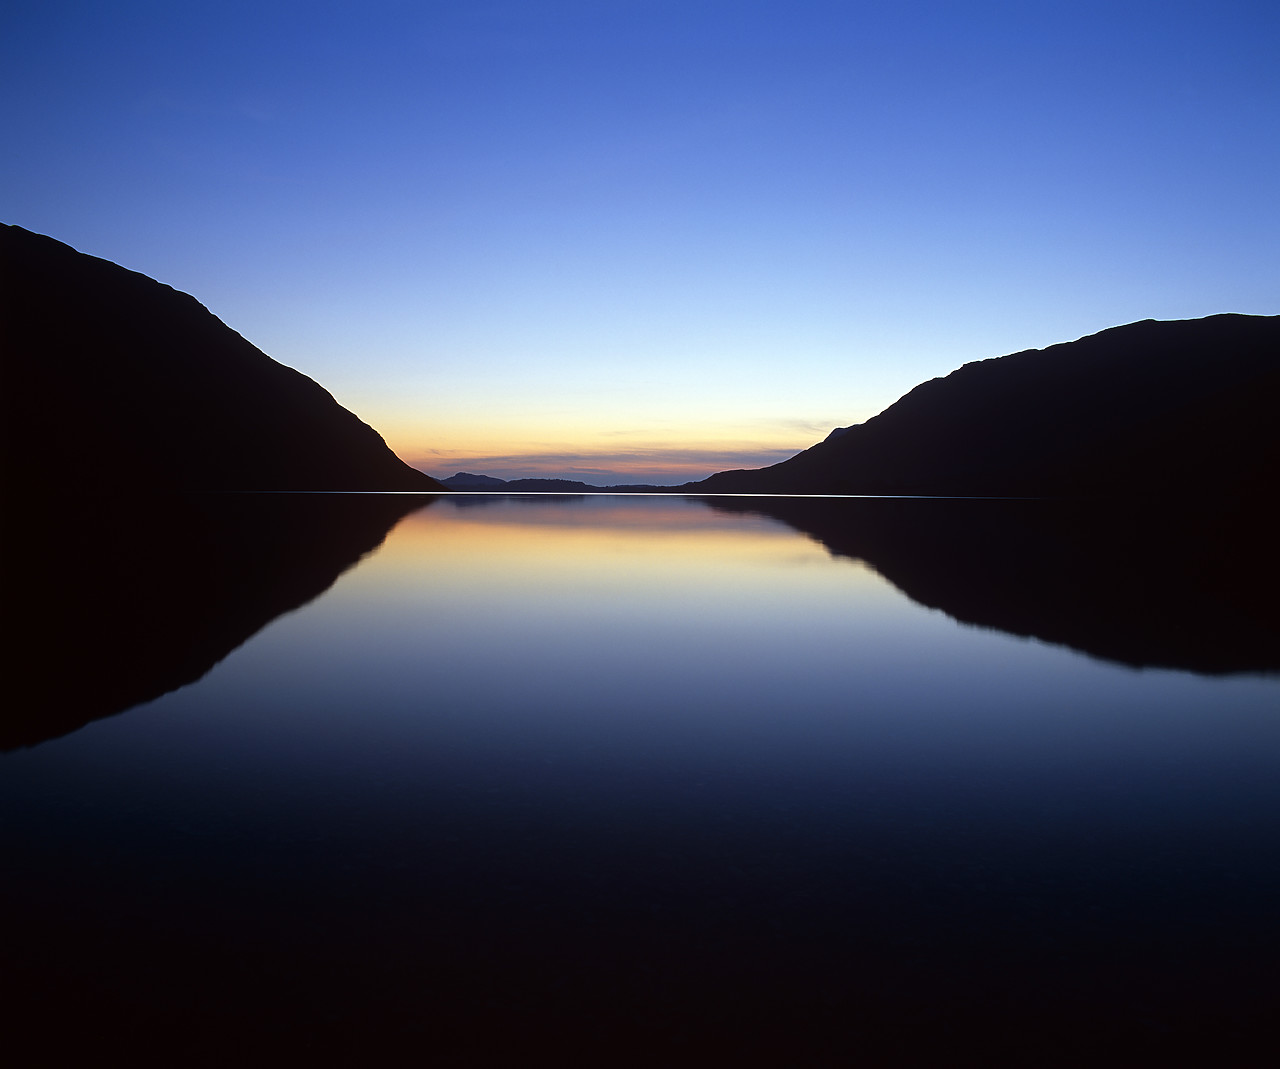 #020761-1 - Wast Water Reflections at Dusk, Lake District National Park, Cumbria, England